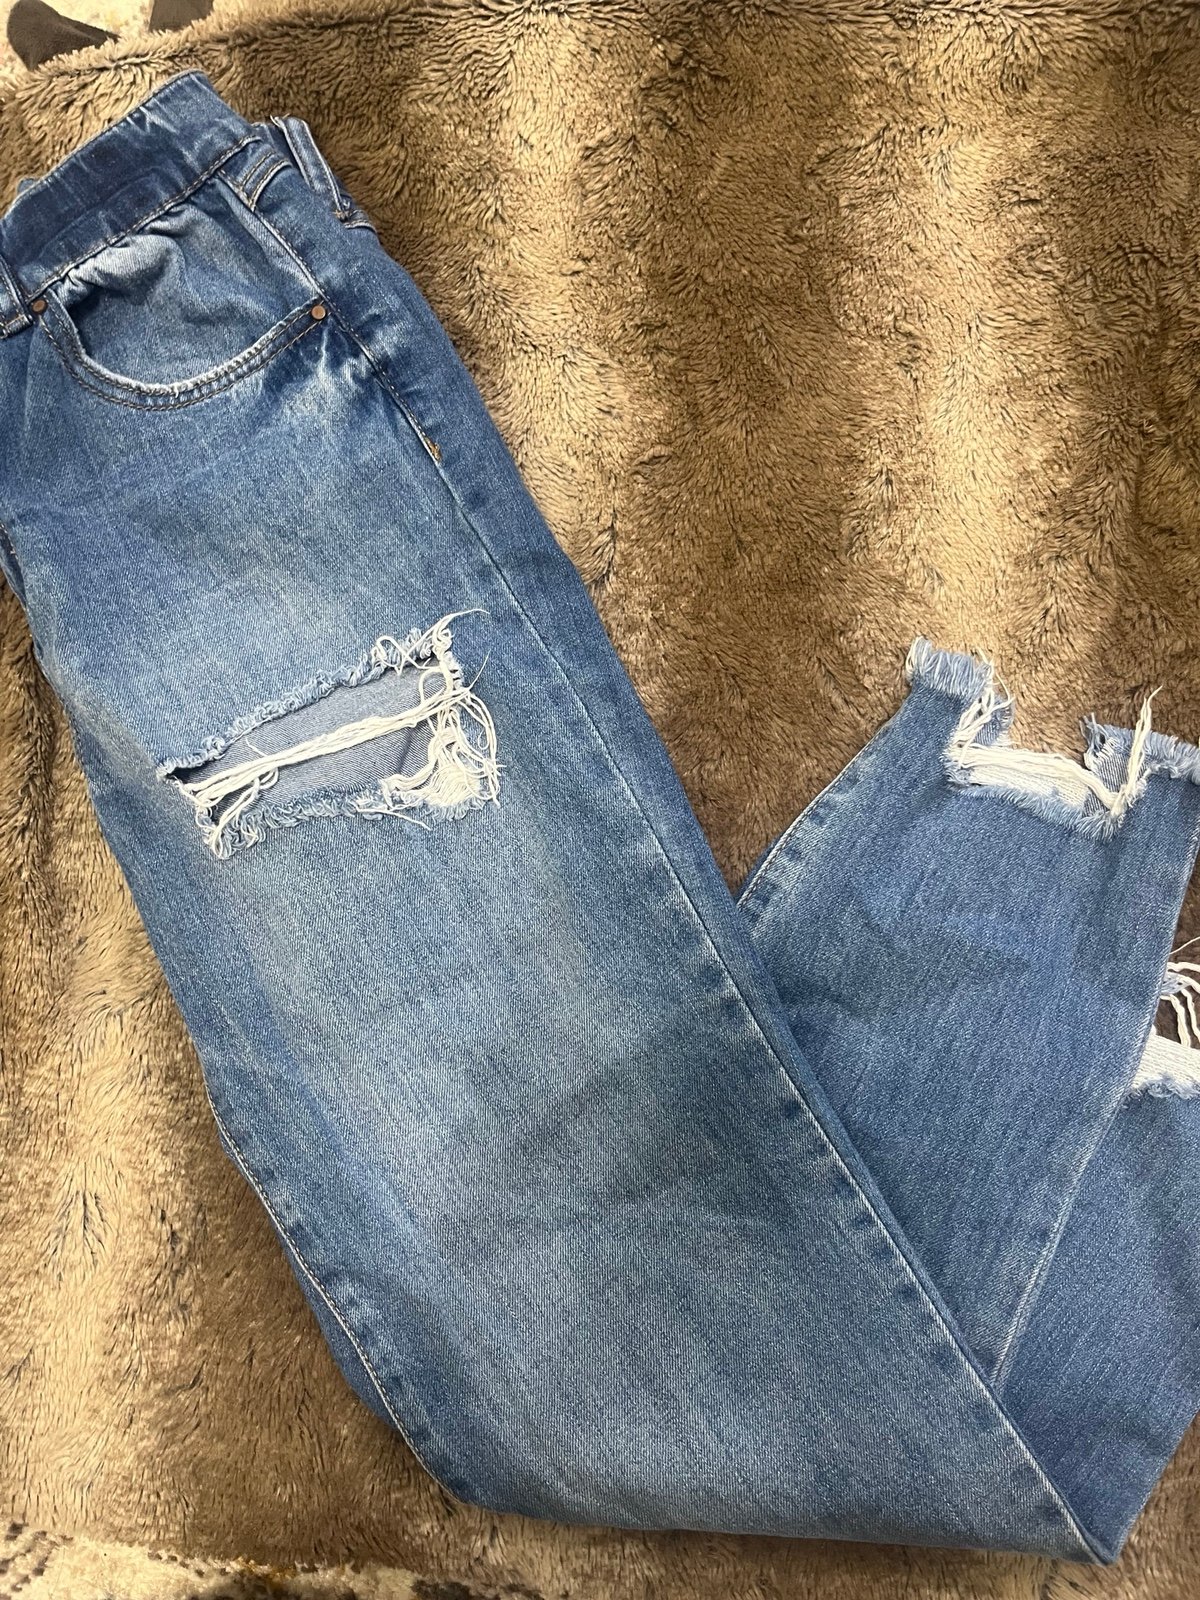 Wholesale price Distressed High Waist Mom Jeans Size 5(27)t oW2UZEOFB well sale